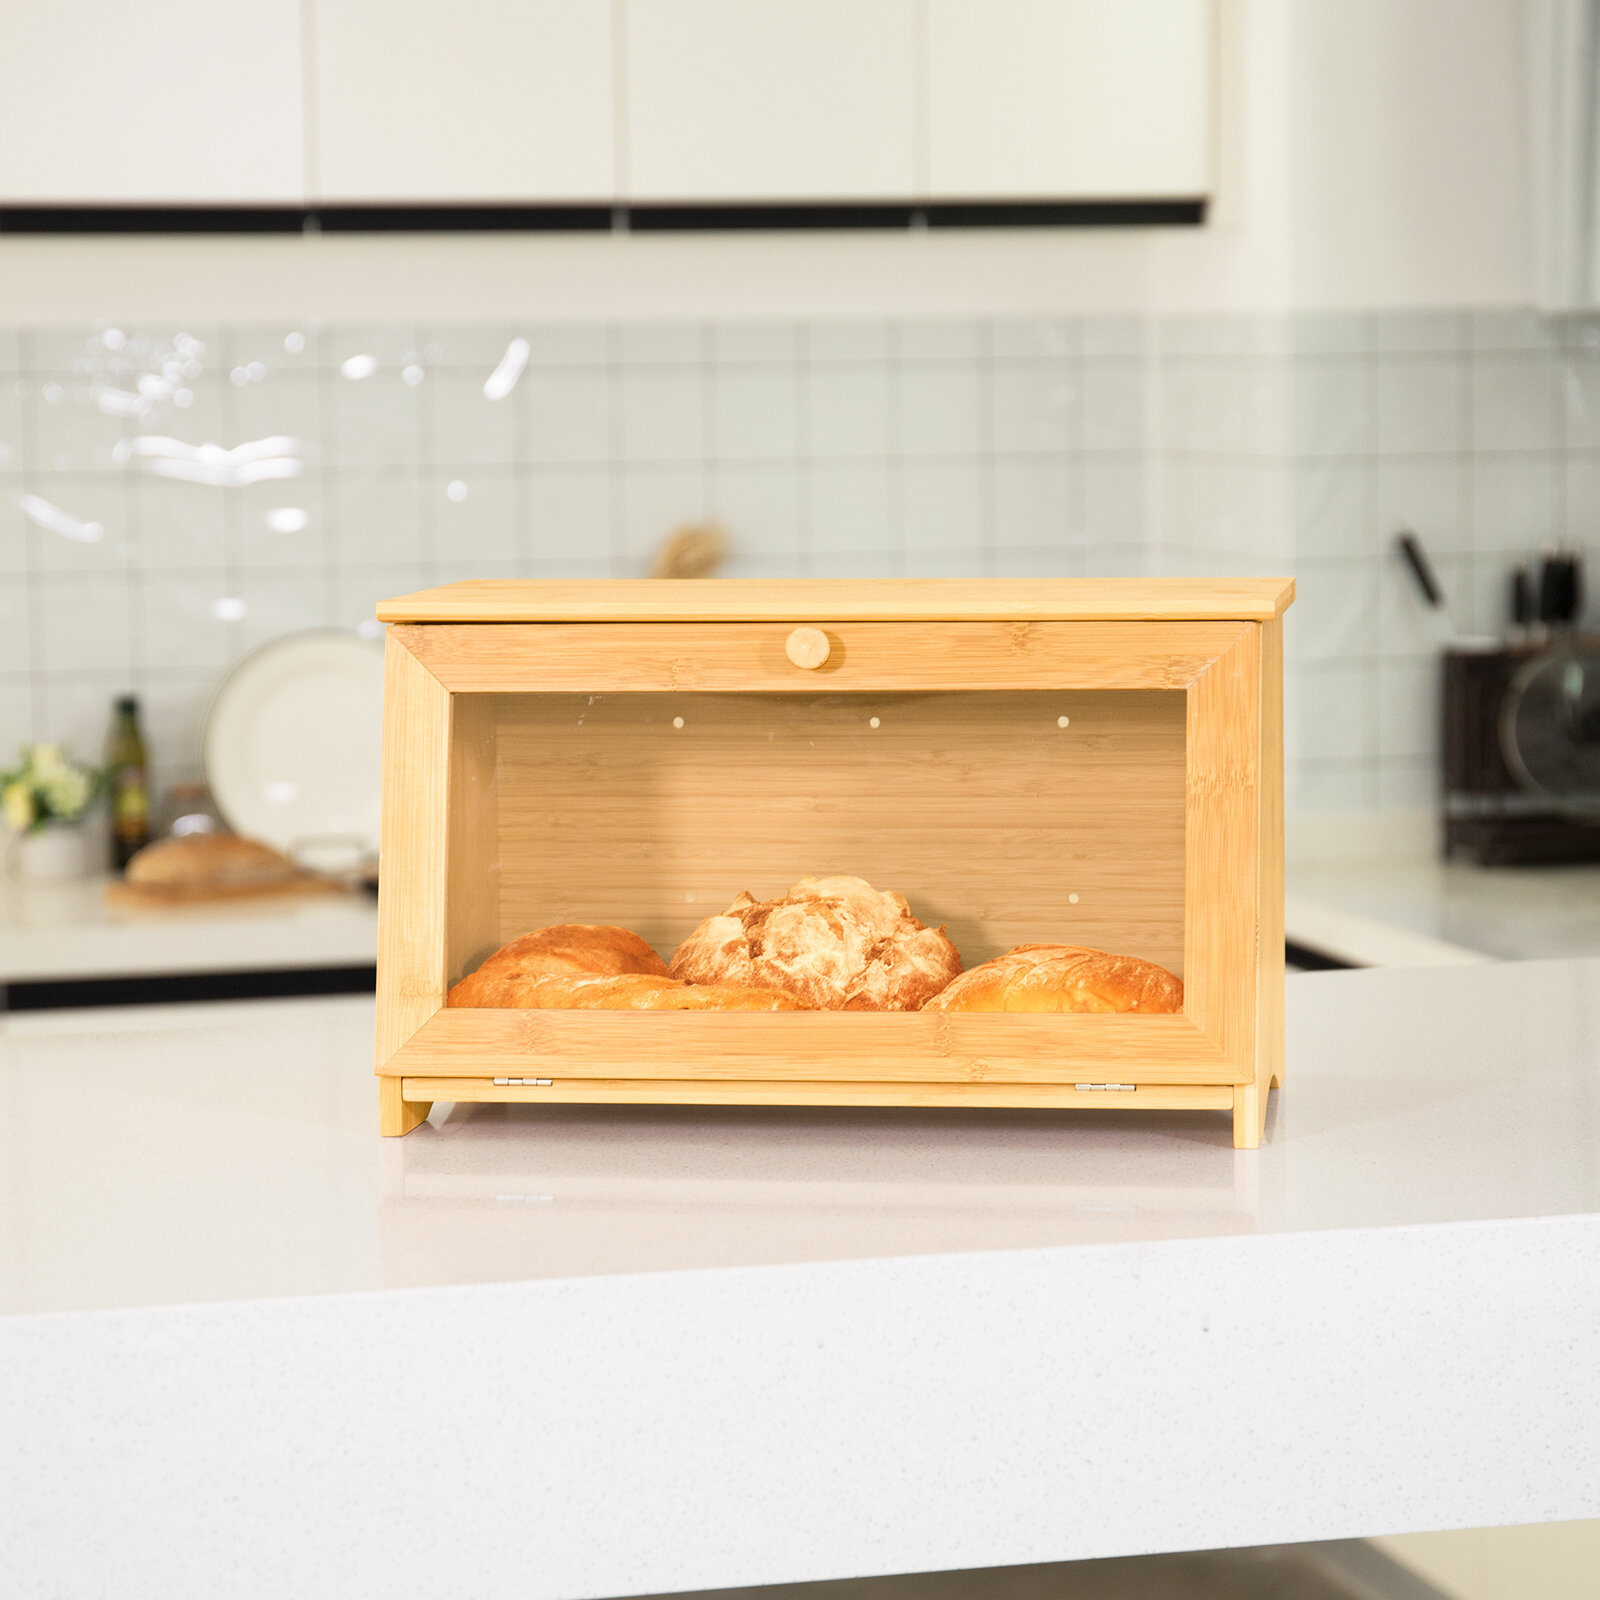 Bamboo Slotted Storage Organizer Bin Wooden Crate for Kitchen